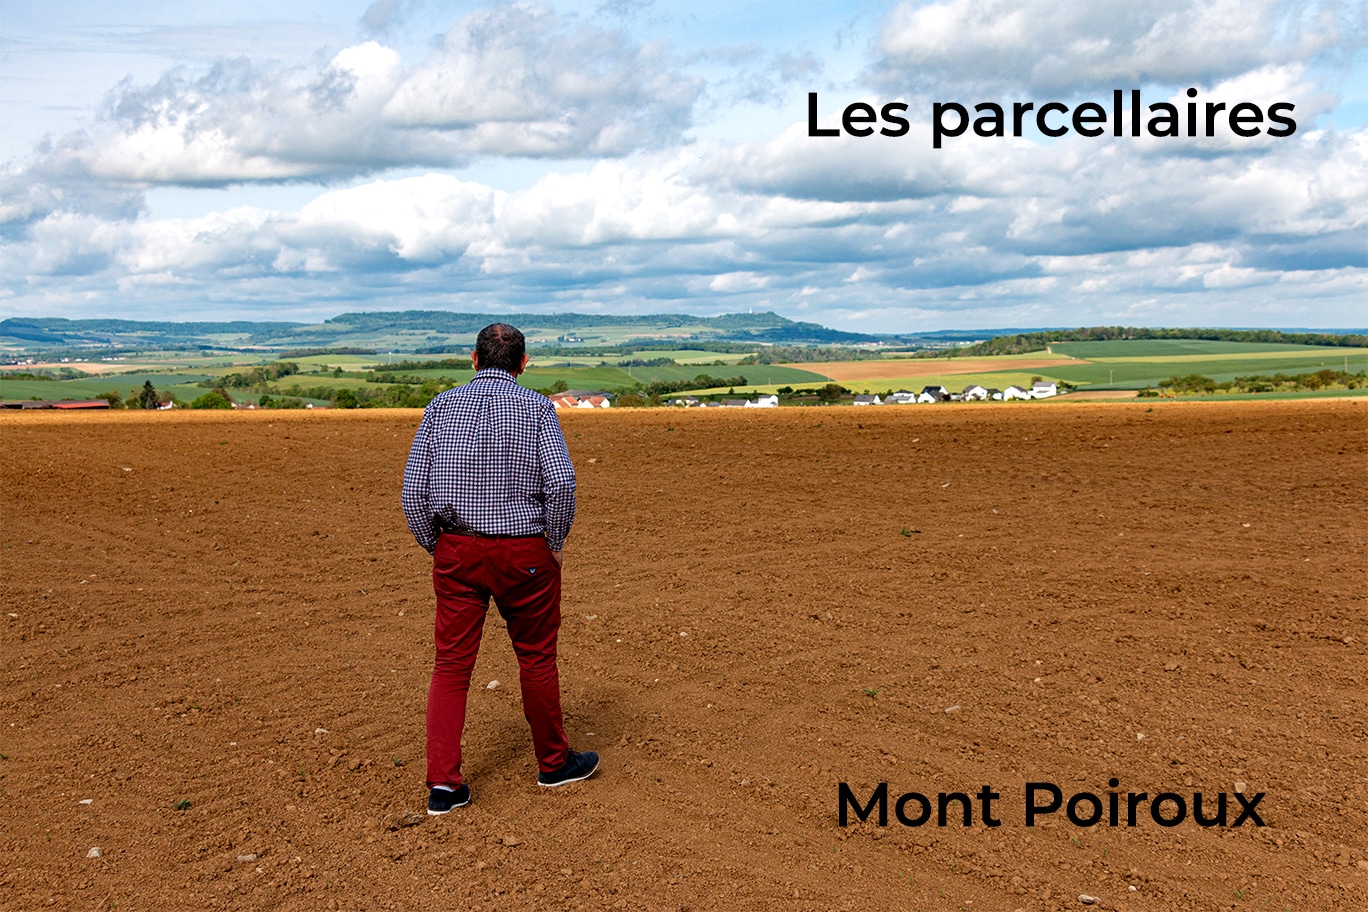 whisky-parcellaire-mont-poiroux-whisky-rozelieures